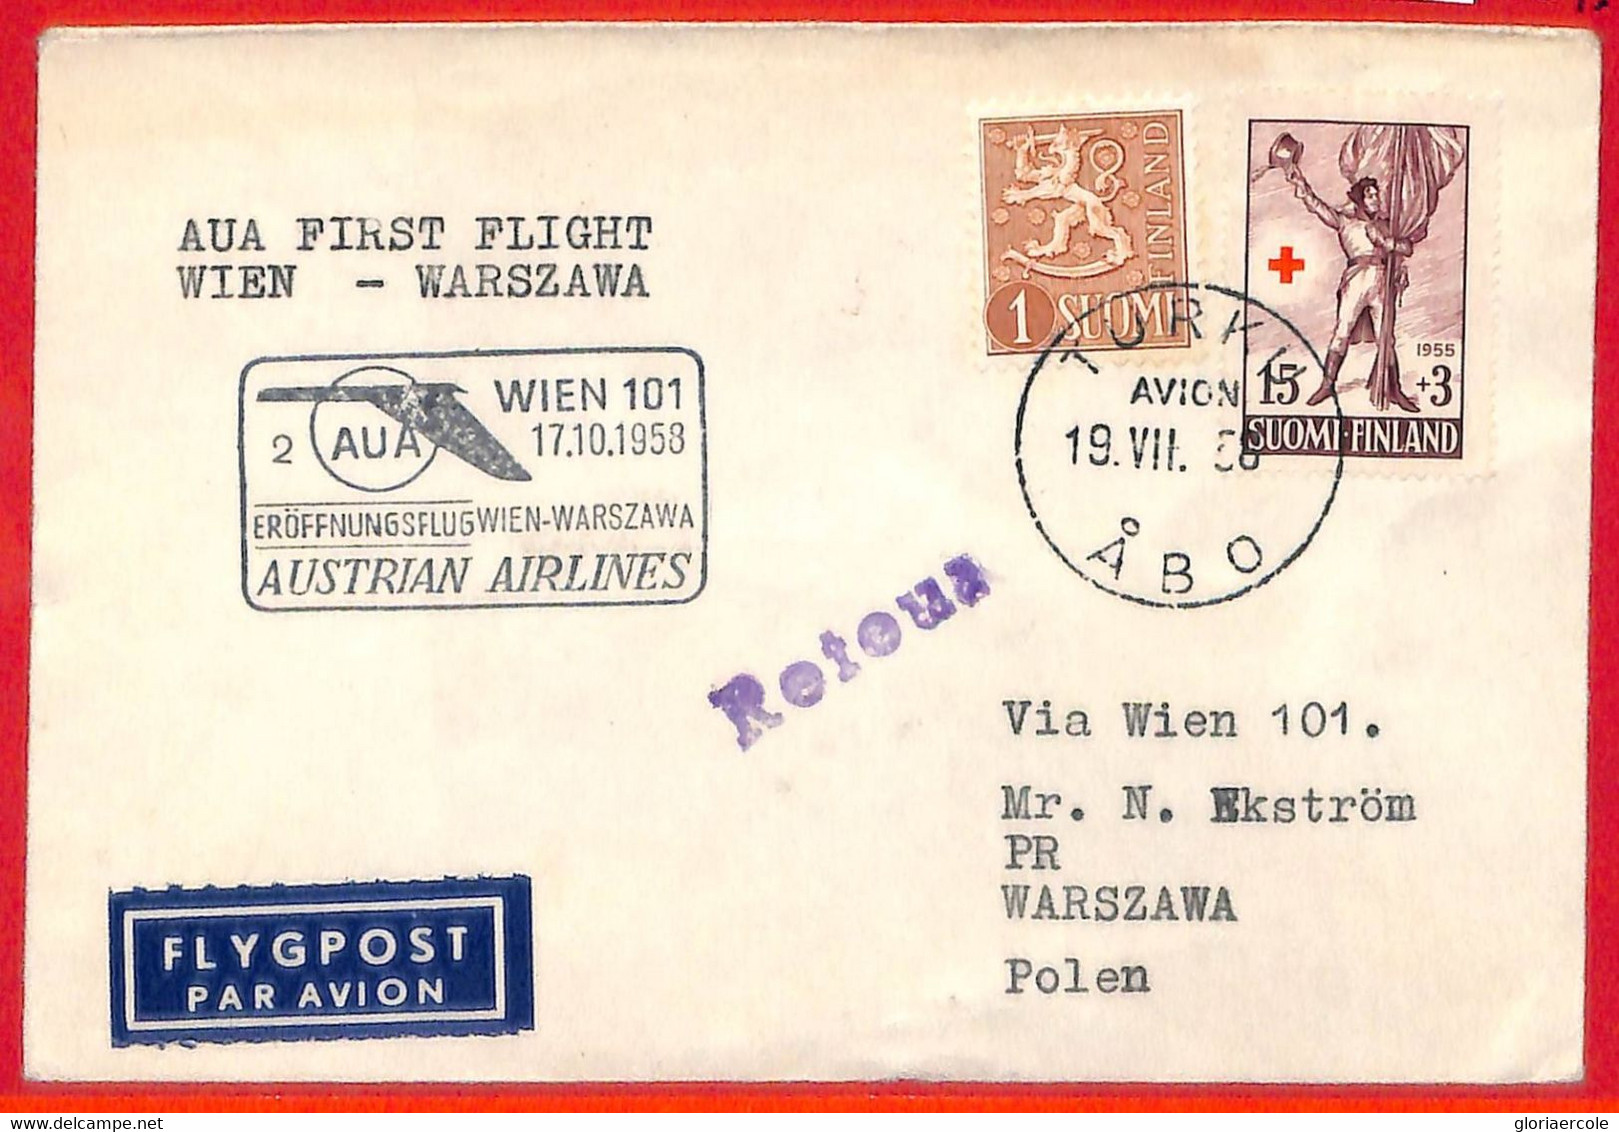 Aa3440 - FINLAND  - Postal History - FIRST FLIGHT COVER Wien - Warsaw  1958 - Lettres & Documents